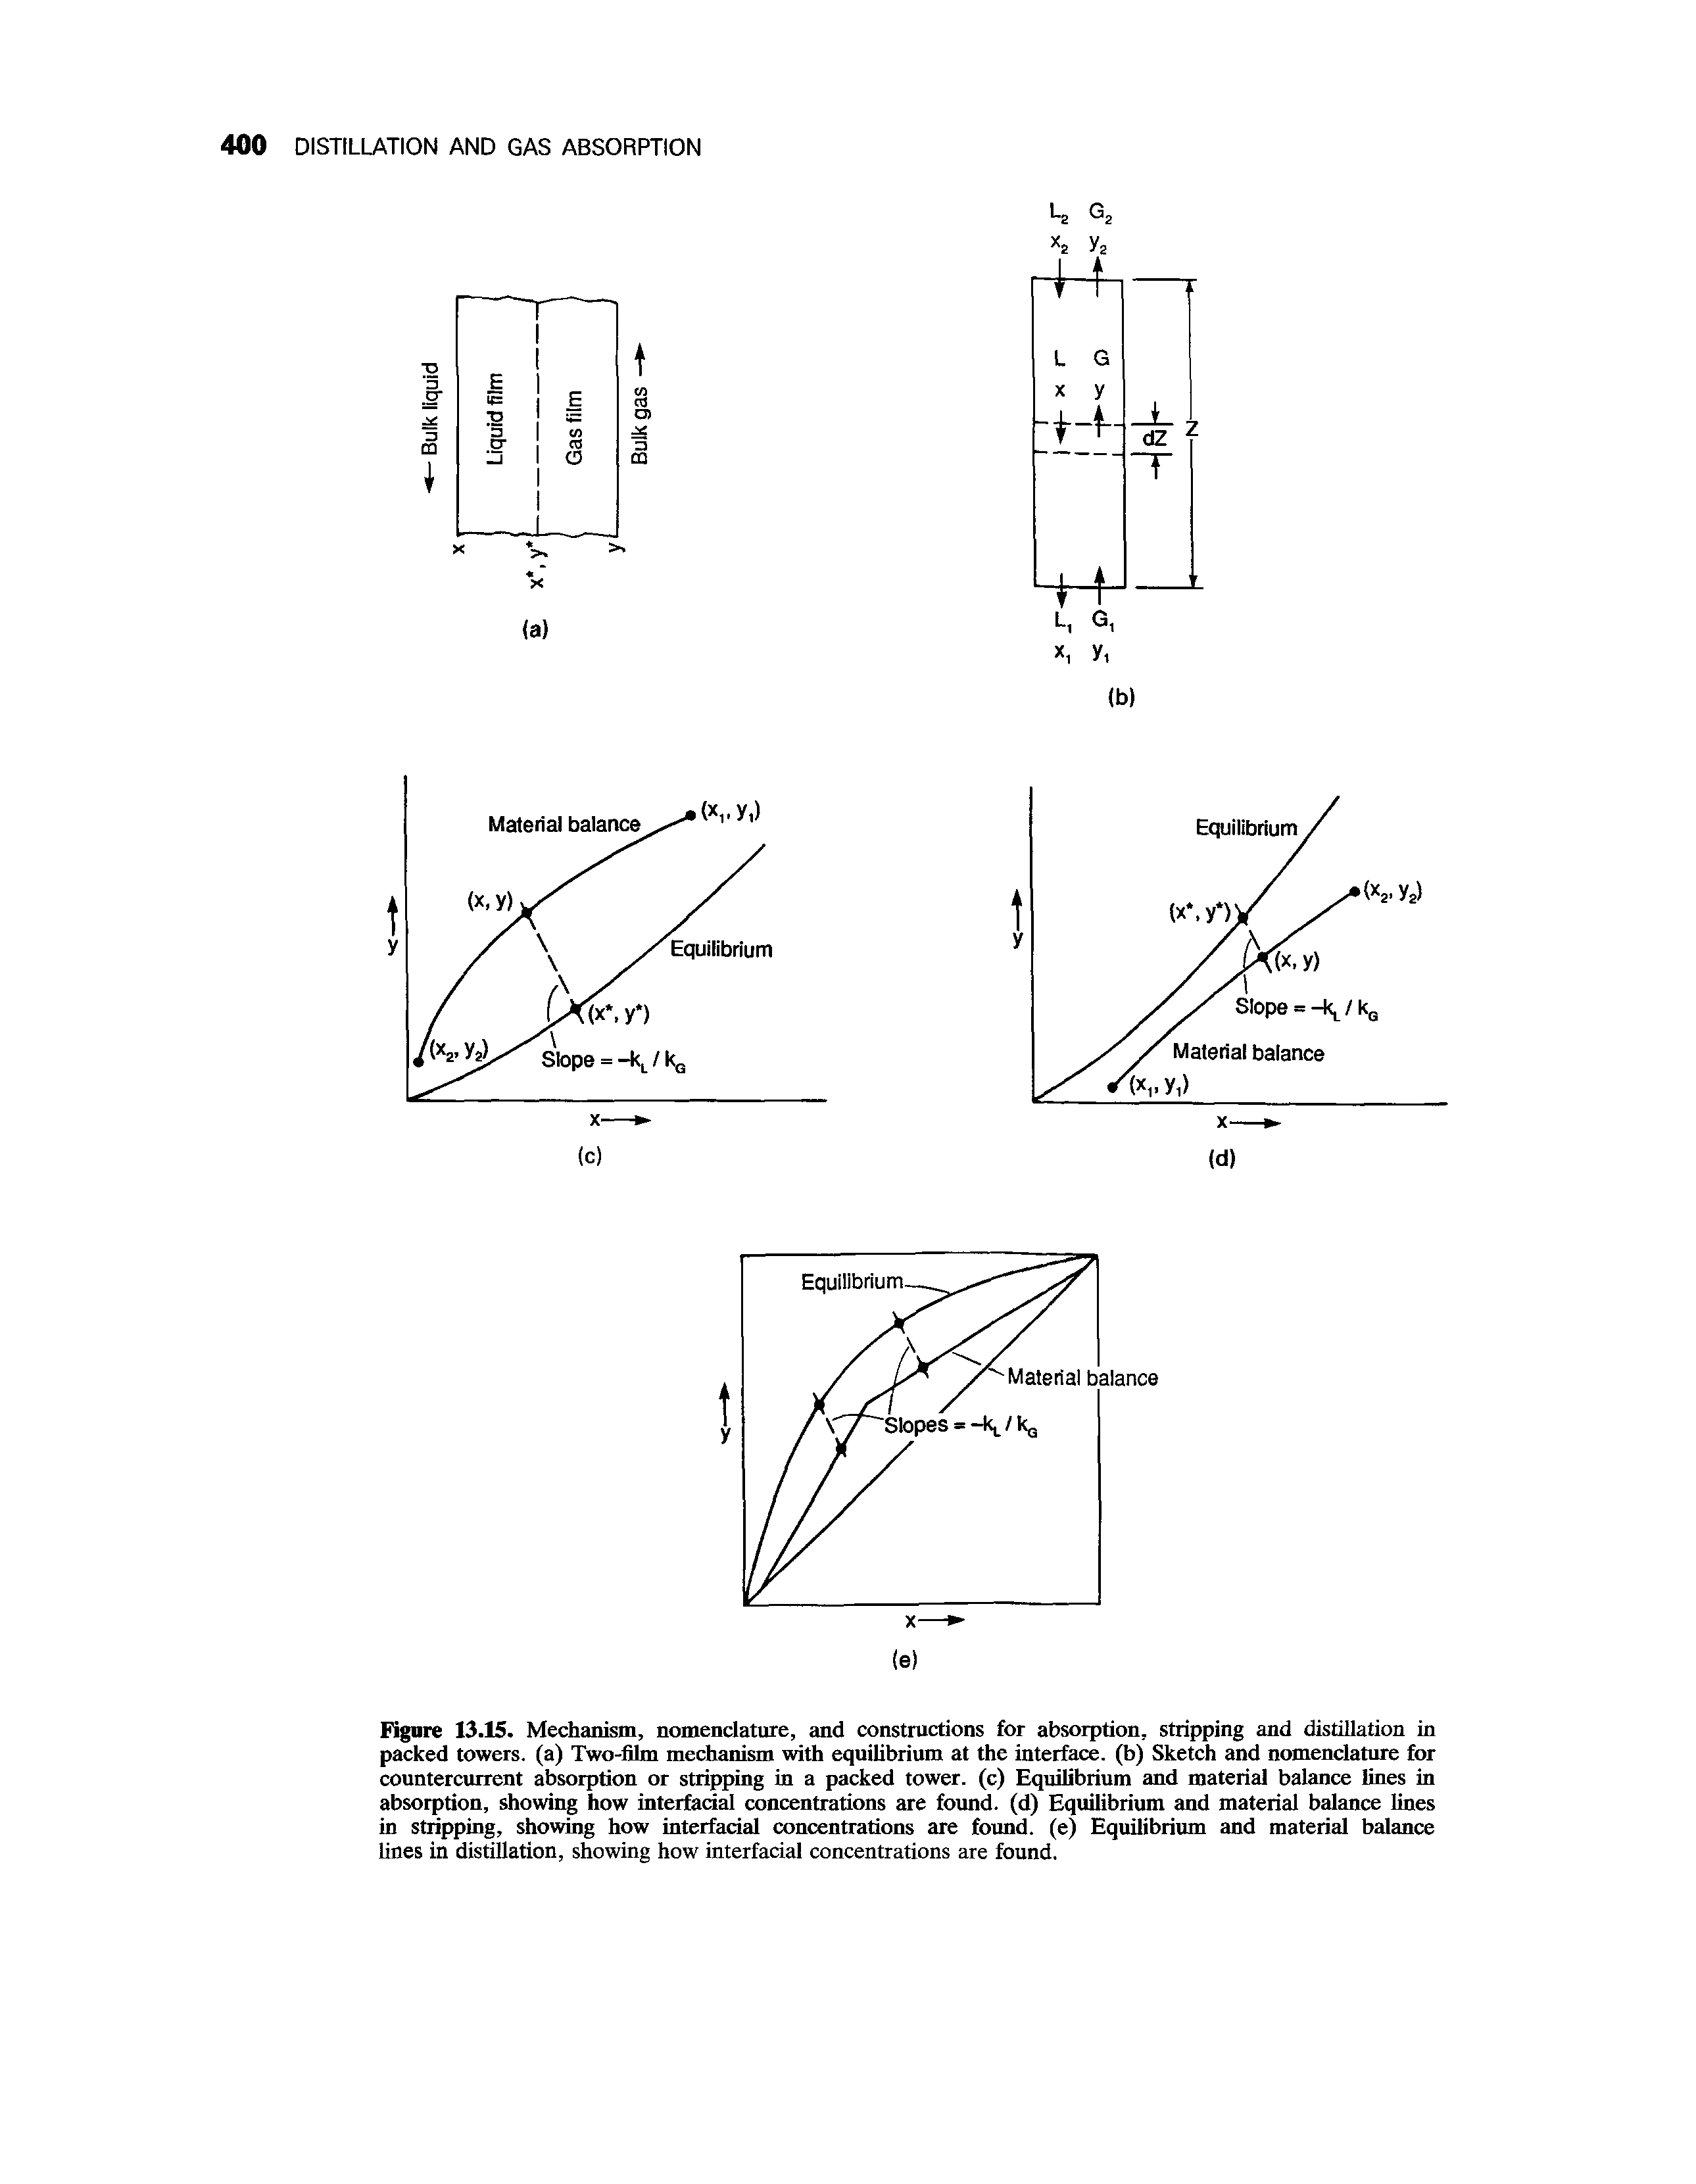 Figure 13.15. Mechanism, nomenclature, and constructions for absorption, stripping and distillation in packed towers, (a) Two-fllm mechanism with equiUbrium at the interface, (b) Sketch and nomenclatme for countercurrent absorption or stripping in a packed tower, (c) Equilibrium and material balance lines in absorption, showing how interfadal concentrations are found, (d) Equilibrium and material balance lines in stripping, showing how interfadal concentrations are found, (e) Equilibrium and material balance lines in distillation, showing how interfacial concentrations are found.